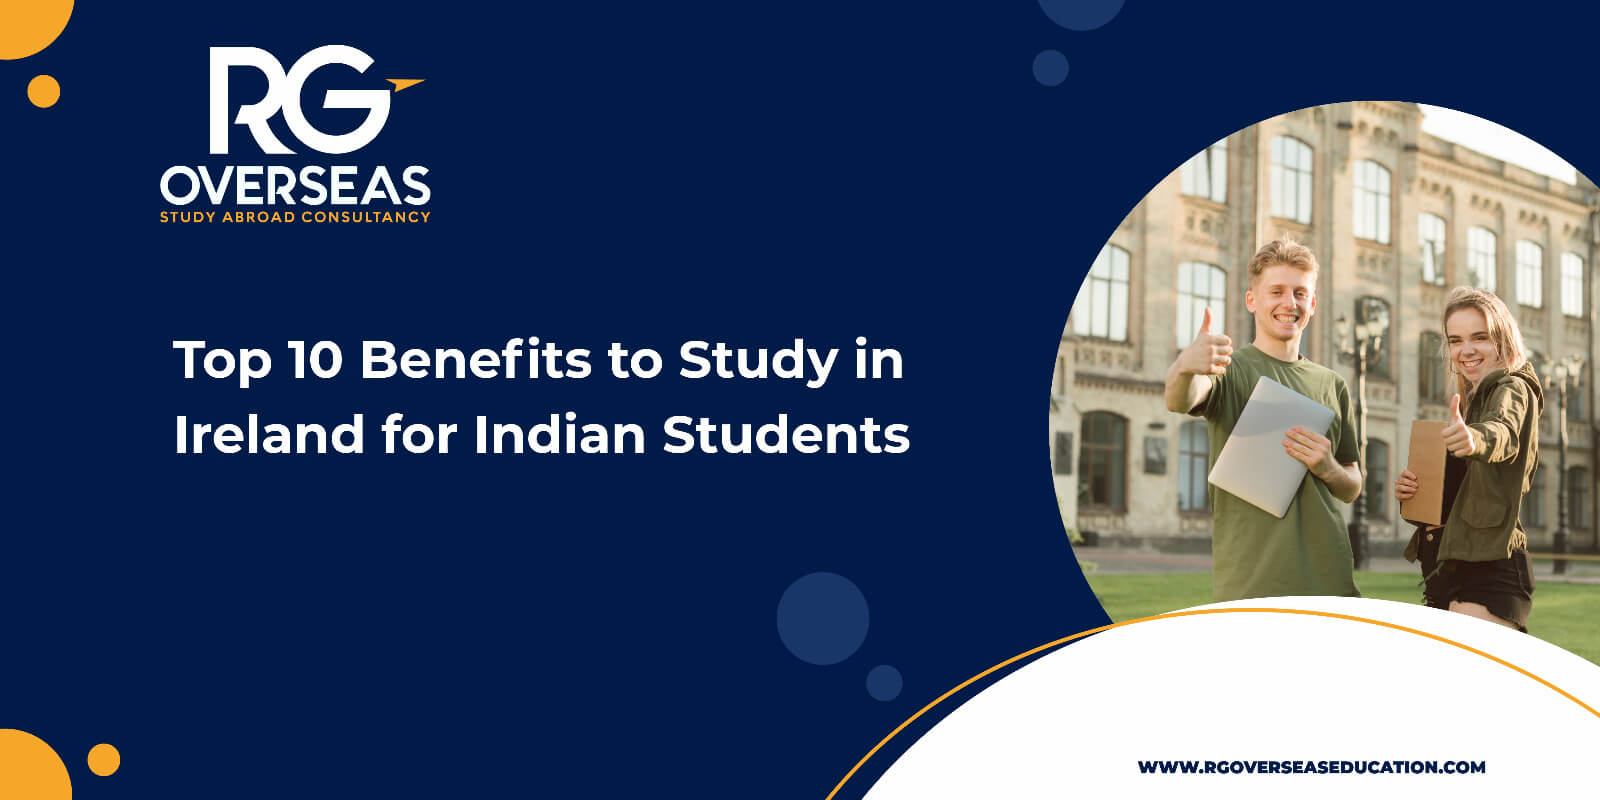 Top 10 Benefits to Study in Ireland for Indian Students